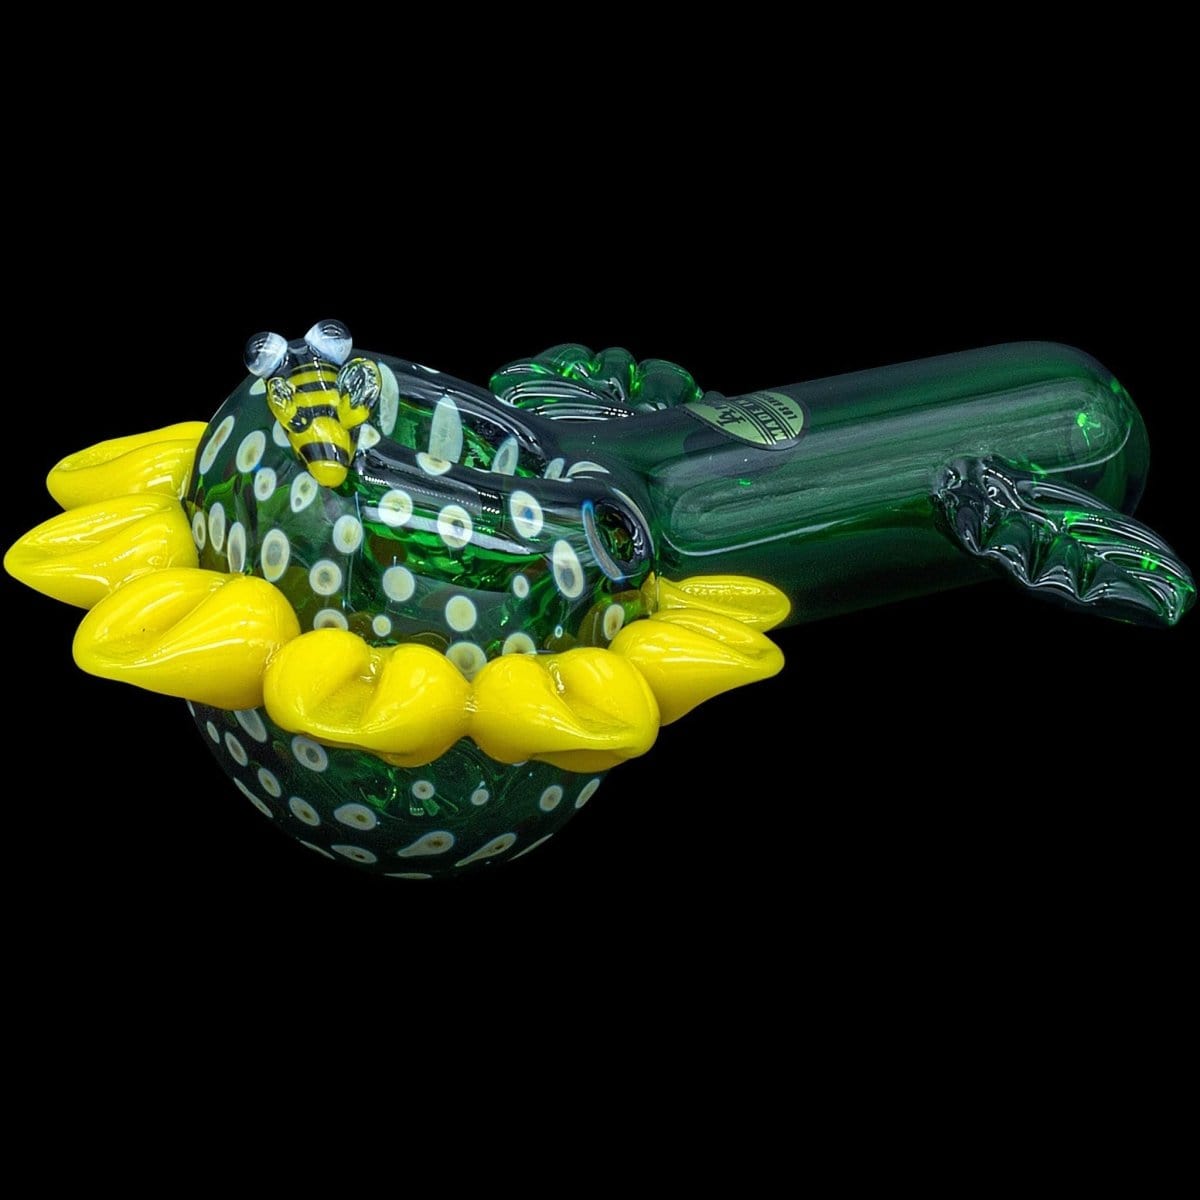 LA Pipes Hand Pipe "Sunny Sunflowers" Glass Pipe